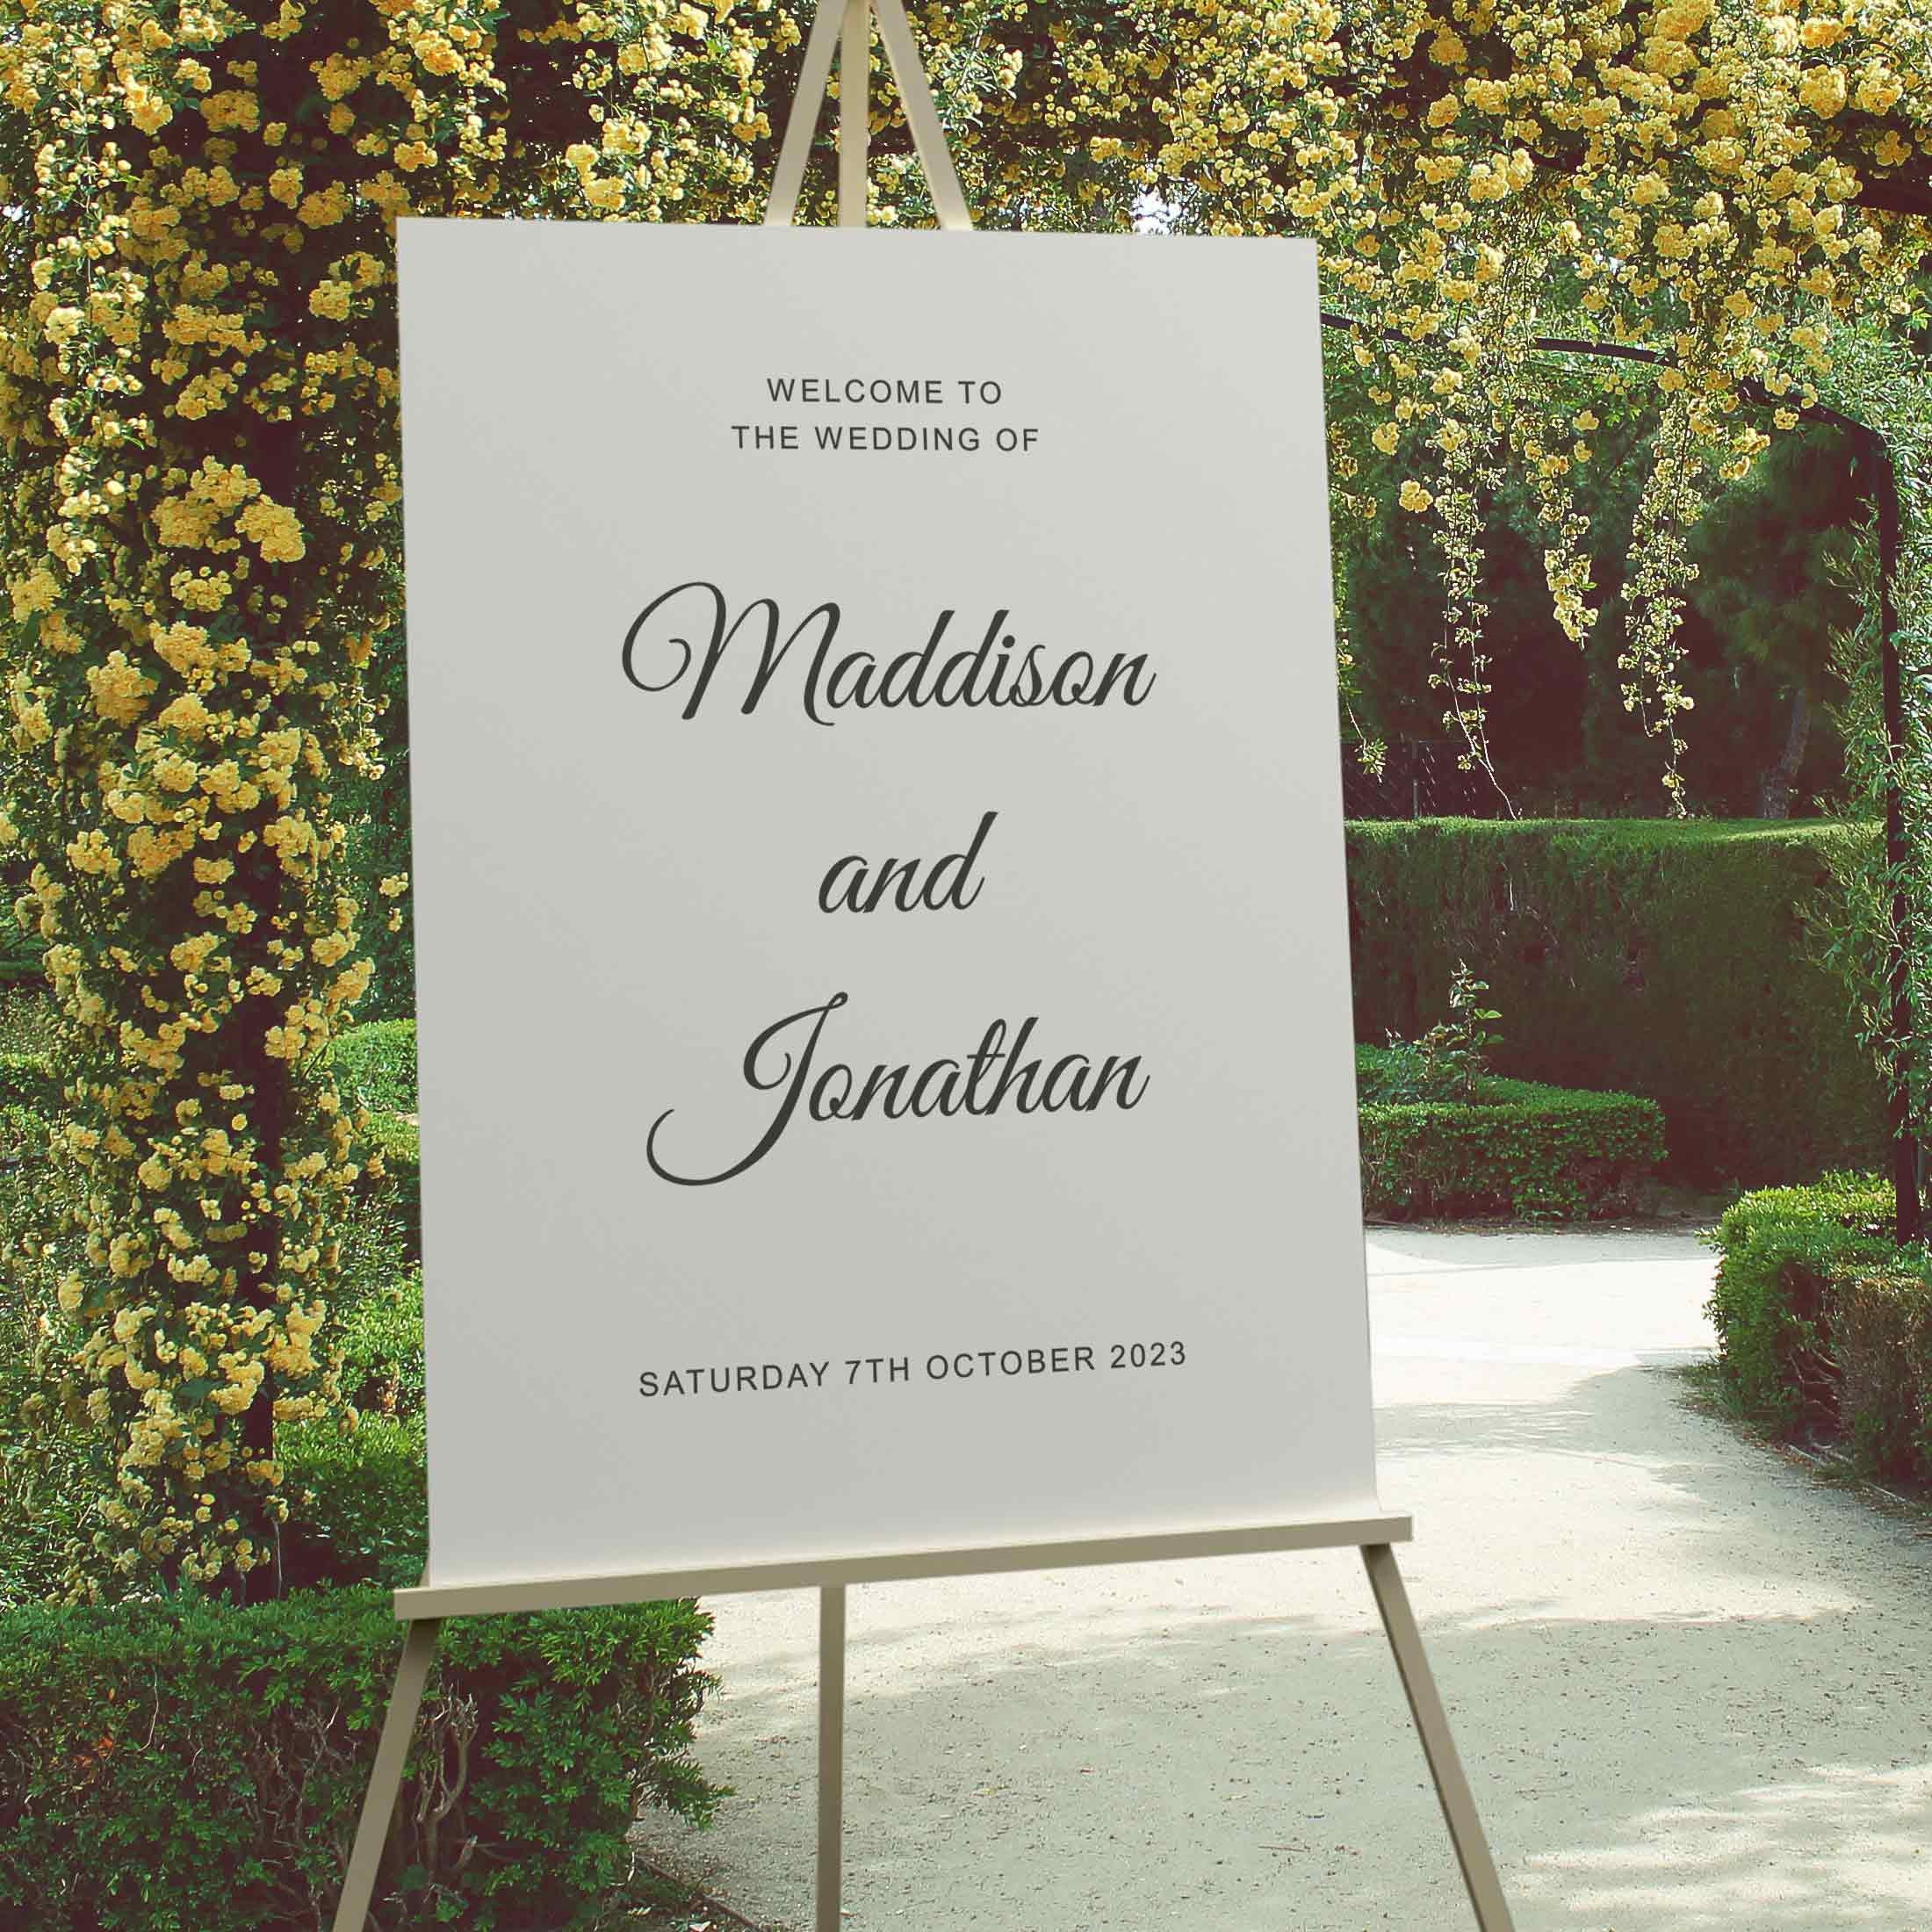 White Acrylic Wedding Reception Sign Suitable For Inside Or Outside The Entrance Foyer